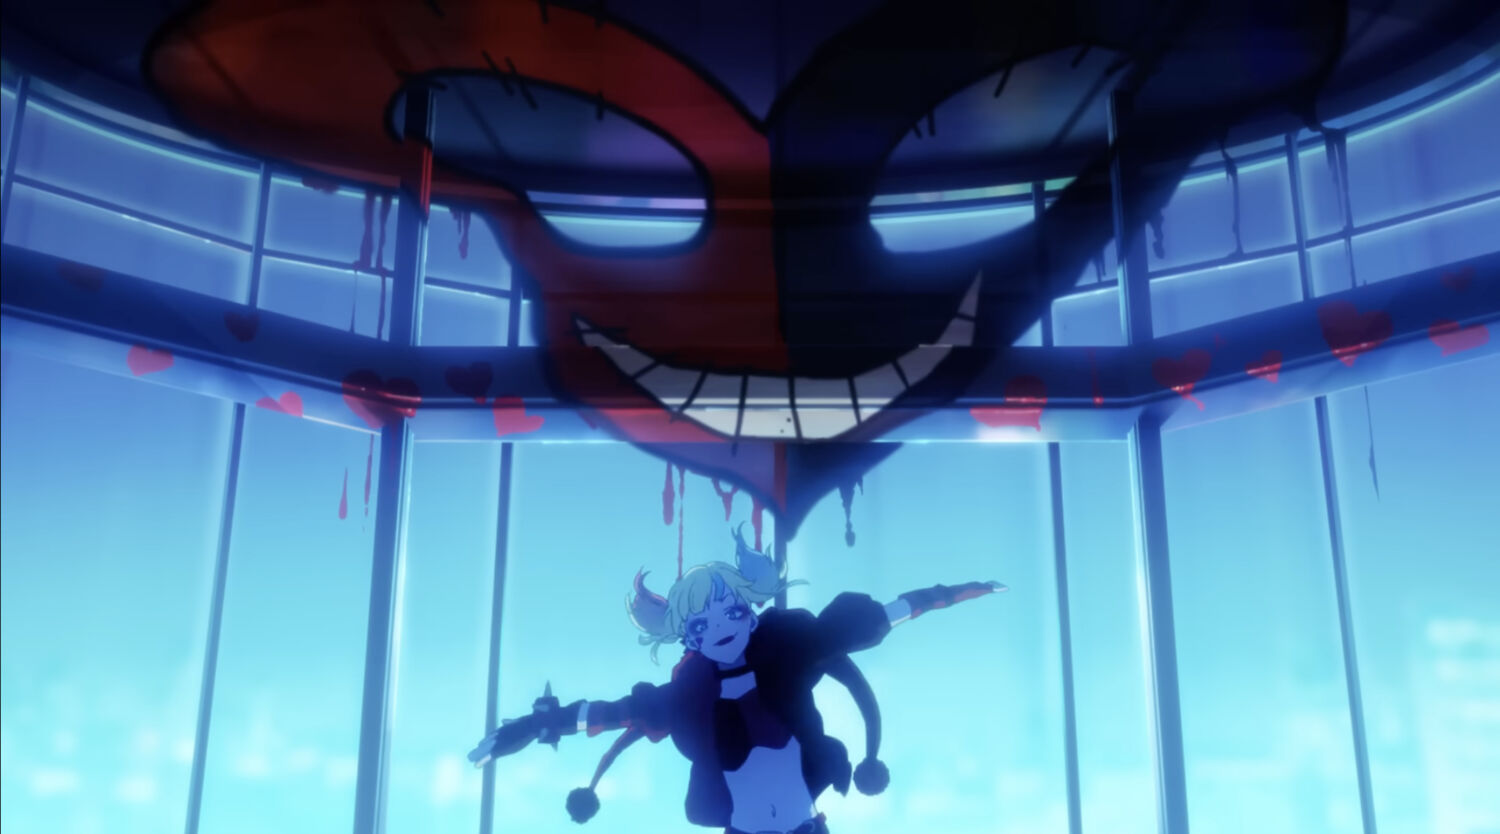 DC's Most Famous Villains Head To Another World In New Trailer For Anime  Series 'Suicide Squad ISEKAI